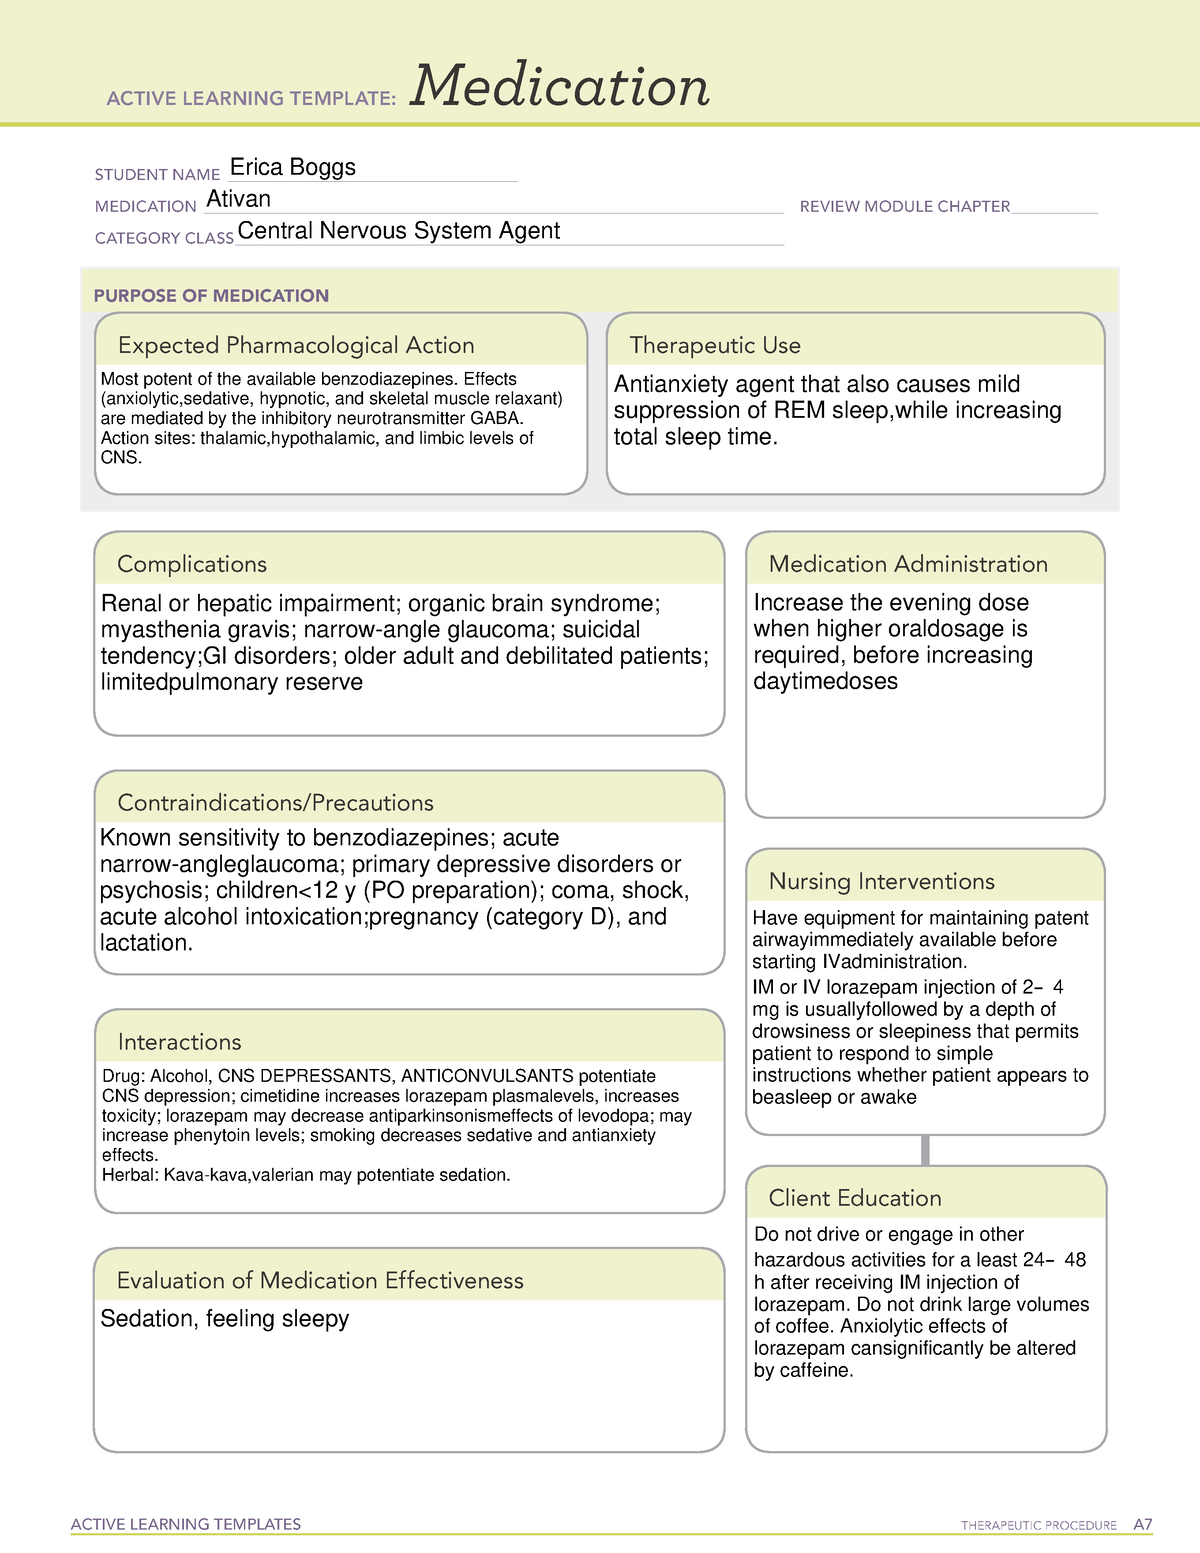 ativan-medication-sheet-active-learning-templates-therapeutic